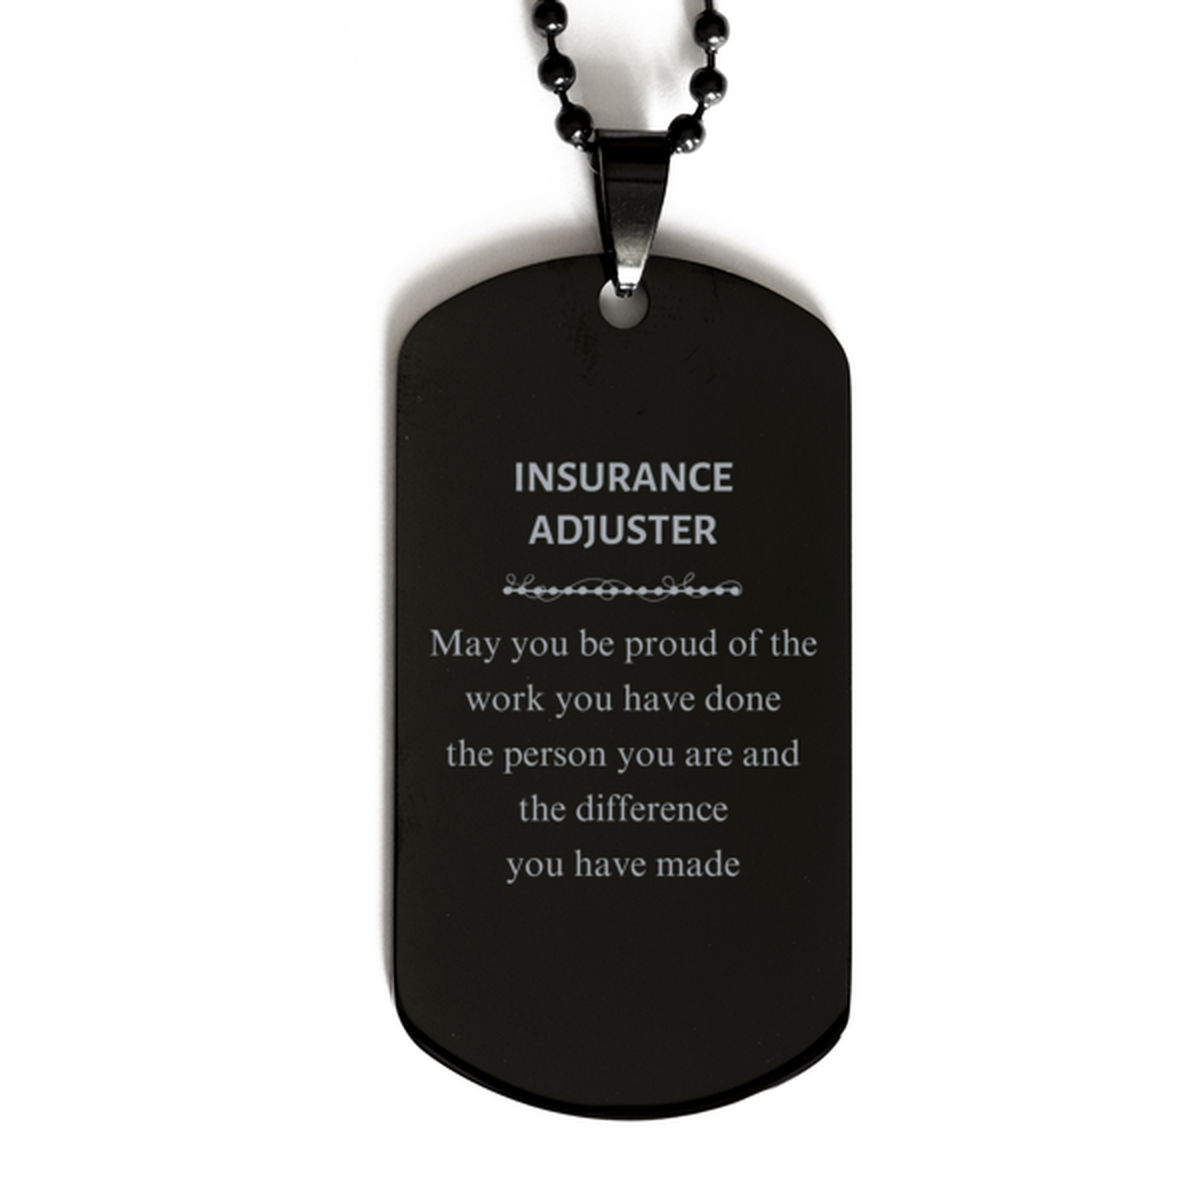 Insurance Adjuster May you be proud of the work you have done, Retirement Insurance Adjuster Black Dog Tag for Colleague Appreciation Gifts Amazing for Insurance Adjuster